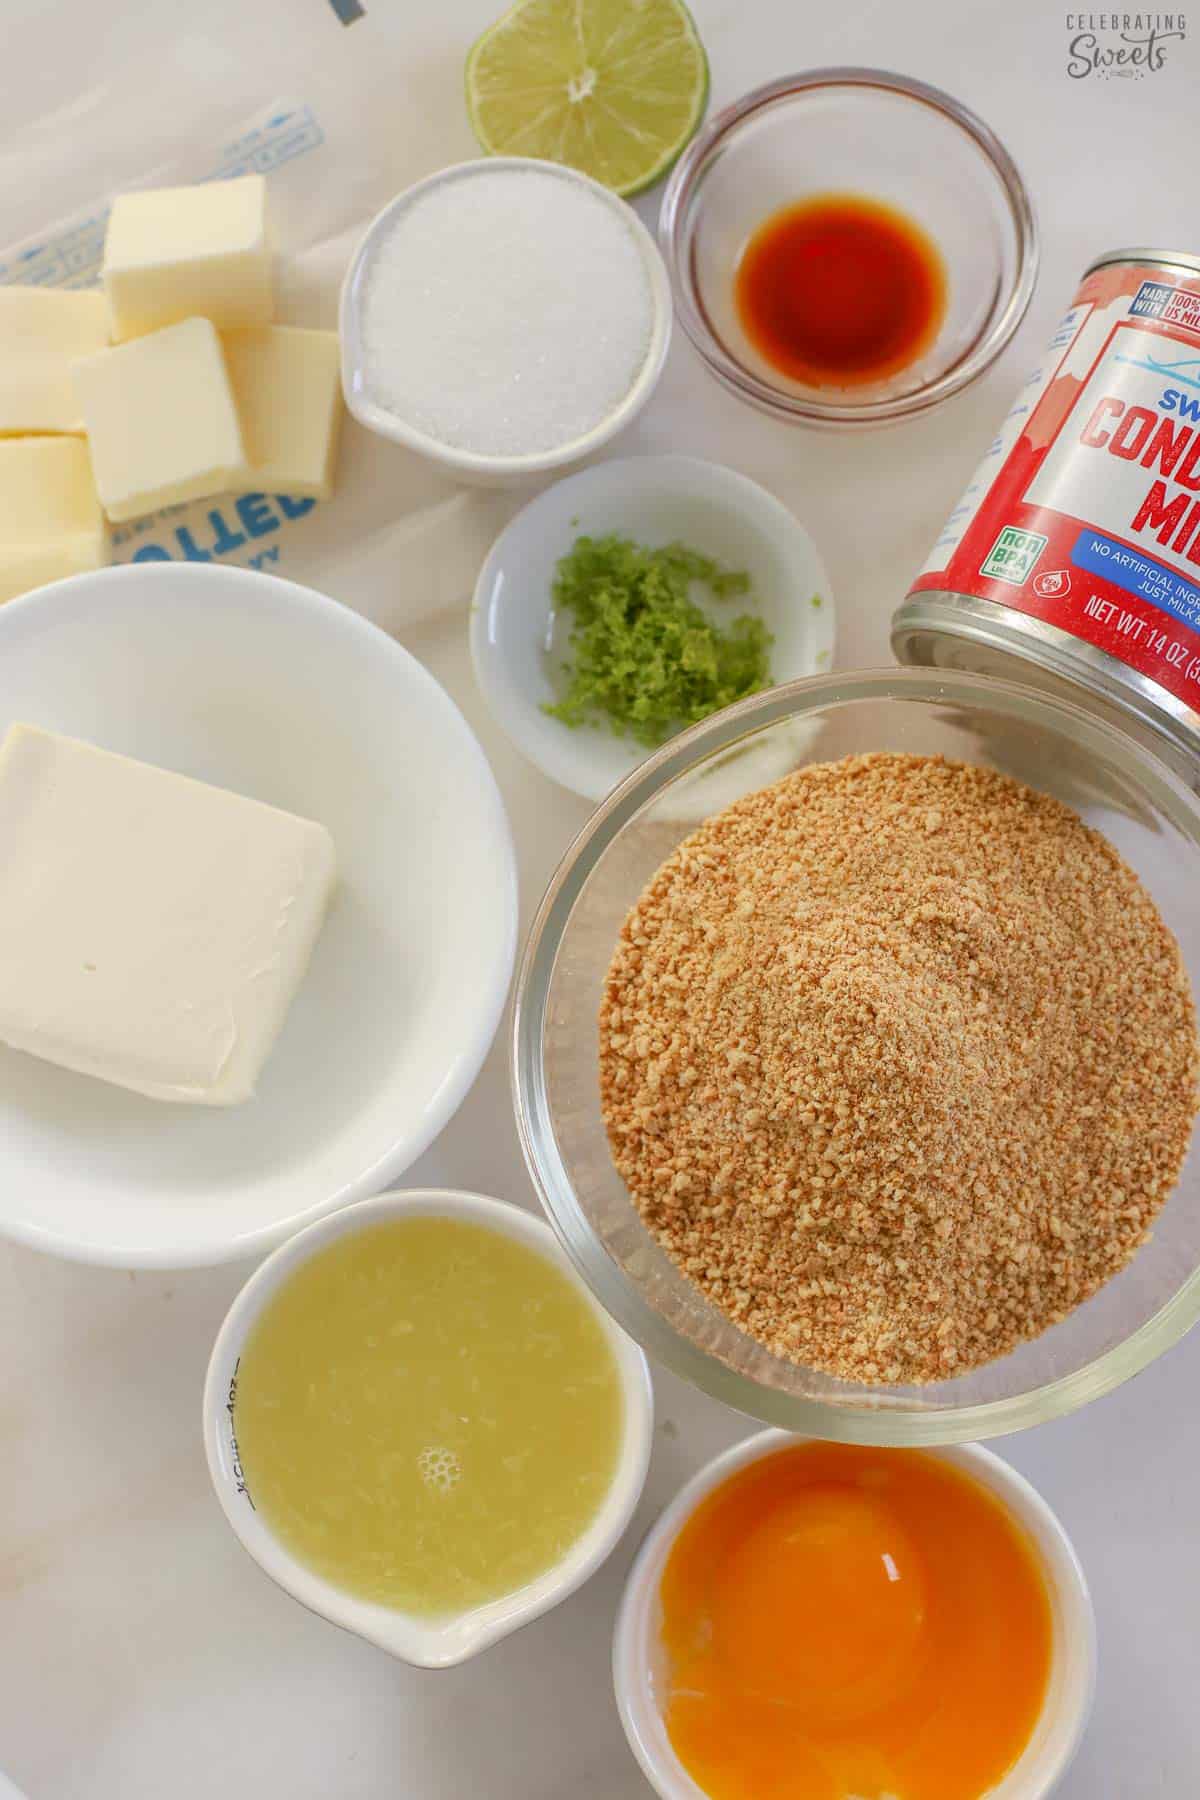 Ingredients for key lime pie bars: limes juice, sugar, cream cheese, eggs, graham cracker, butter, milk.